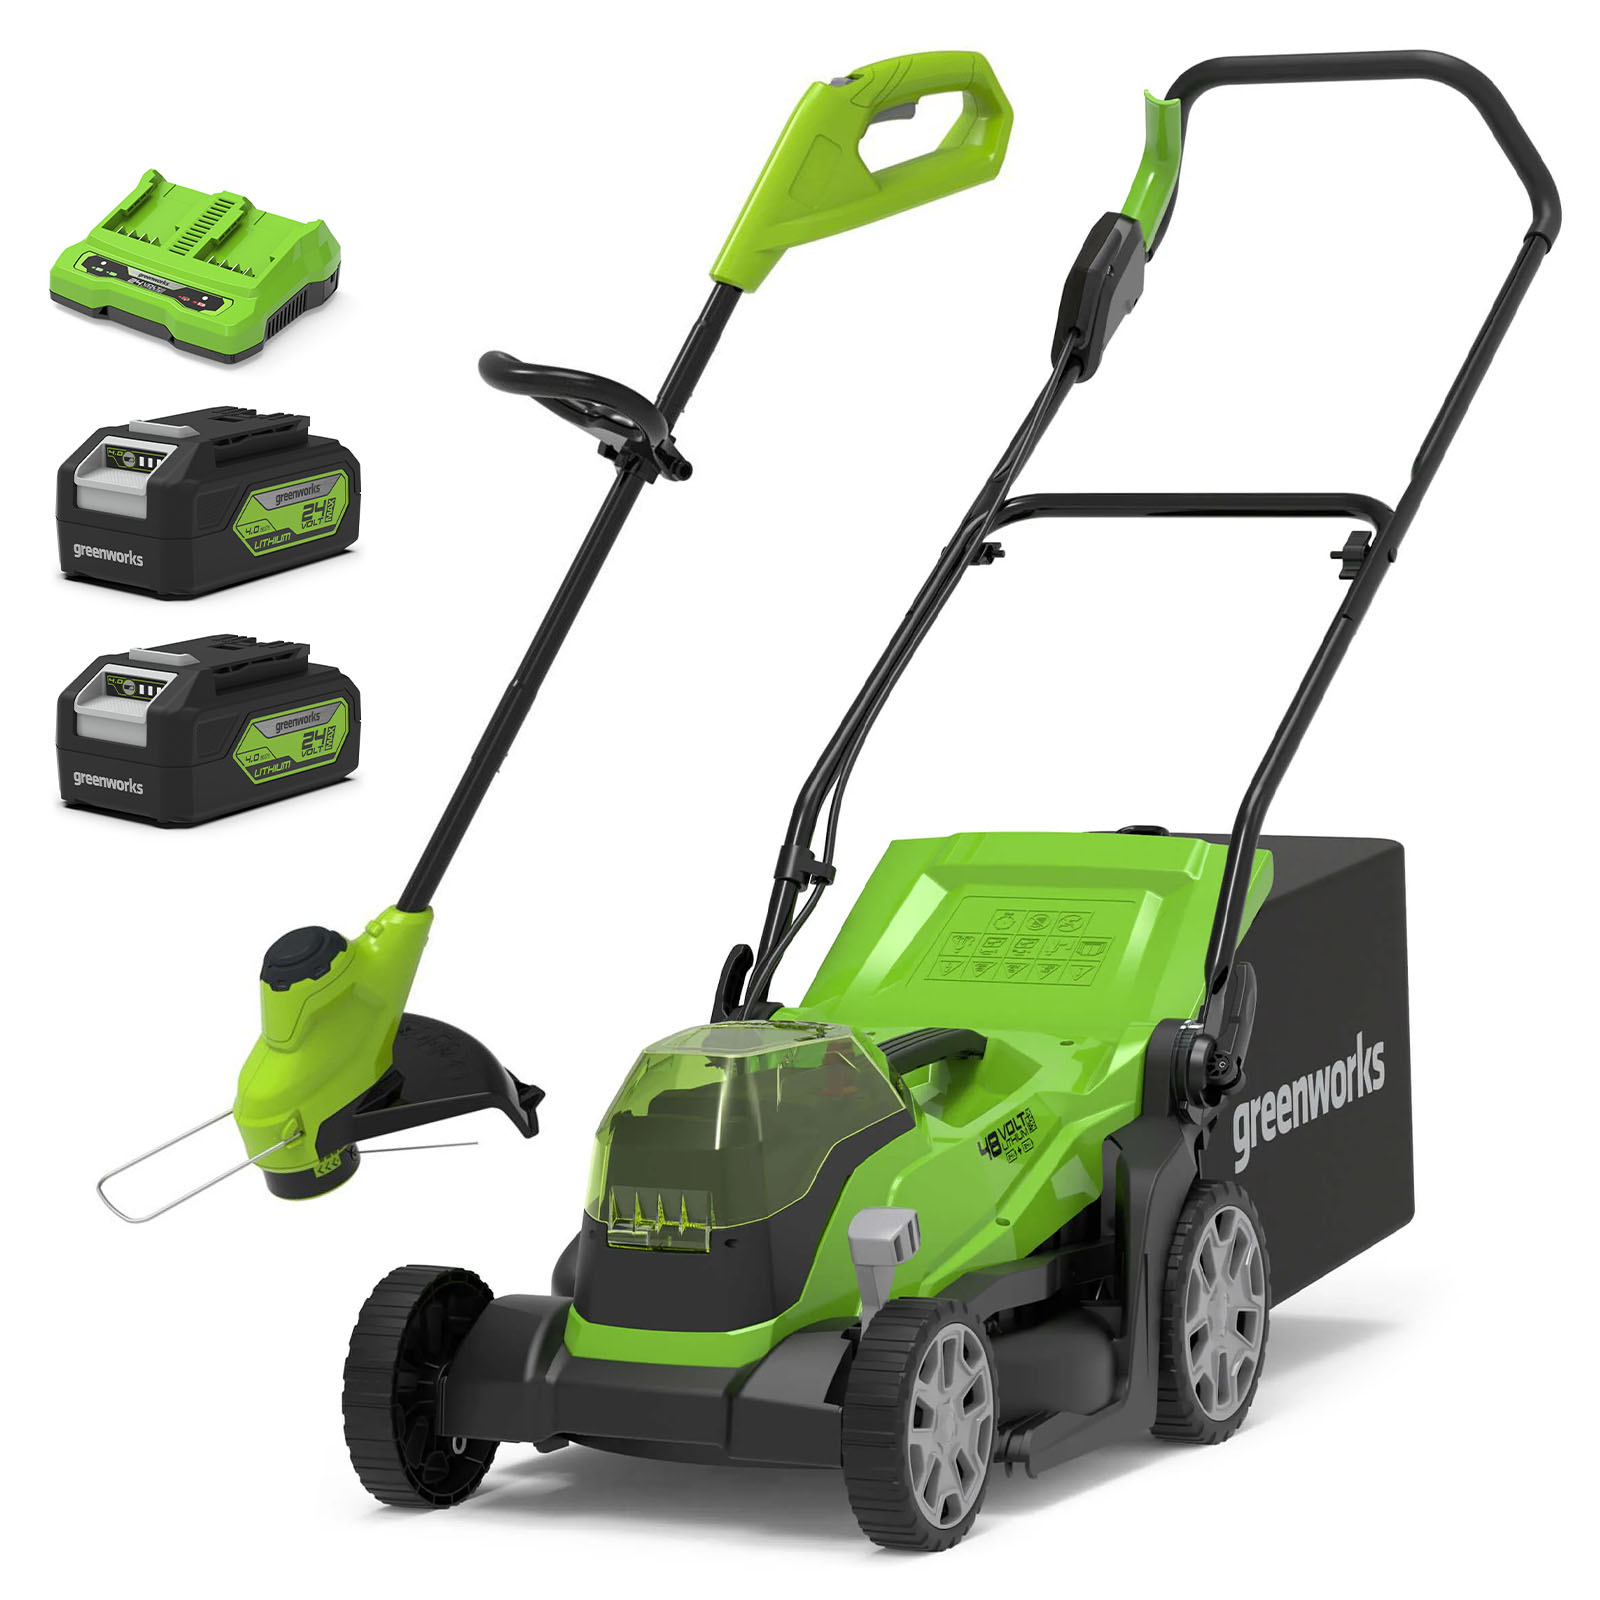 Greenworks 48v Cordless Rotary Lawnmower and Grass Trimmer 250mm 2 x 4ah Li-ion Charger